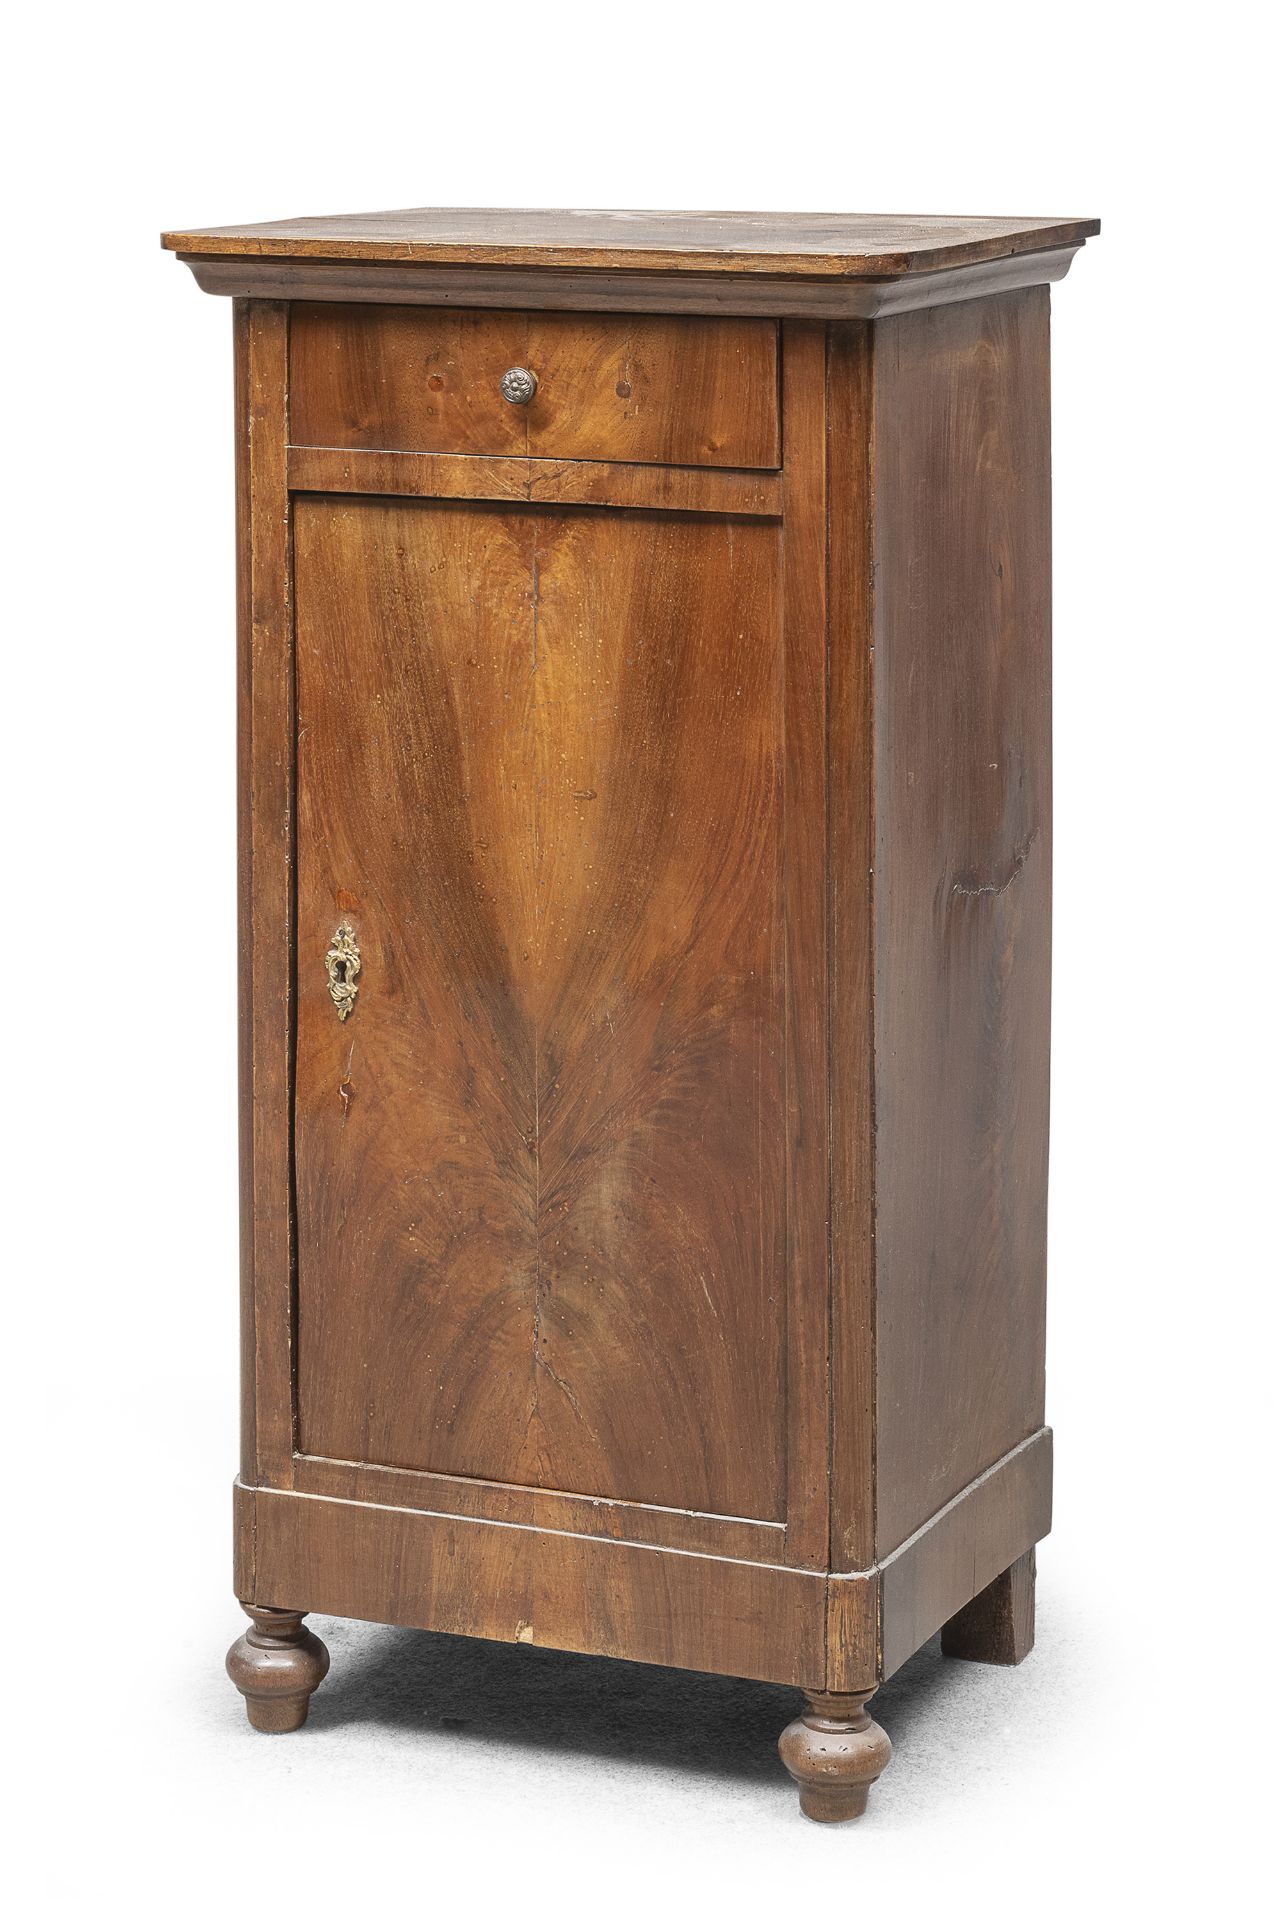 WALNUT BEDSIDE TABLE FIRST HALF OF THE 19TH CENTURY